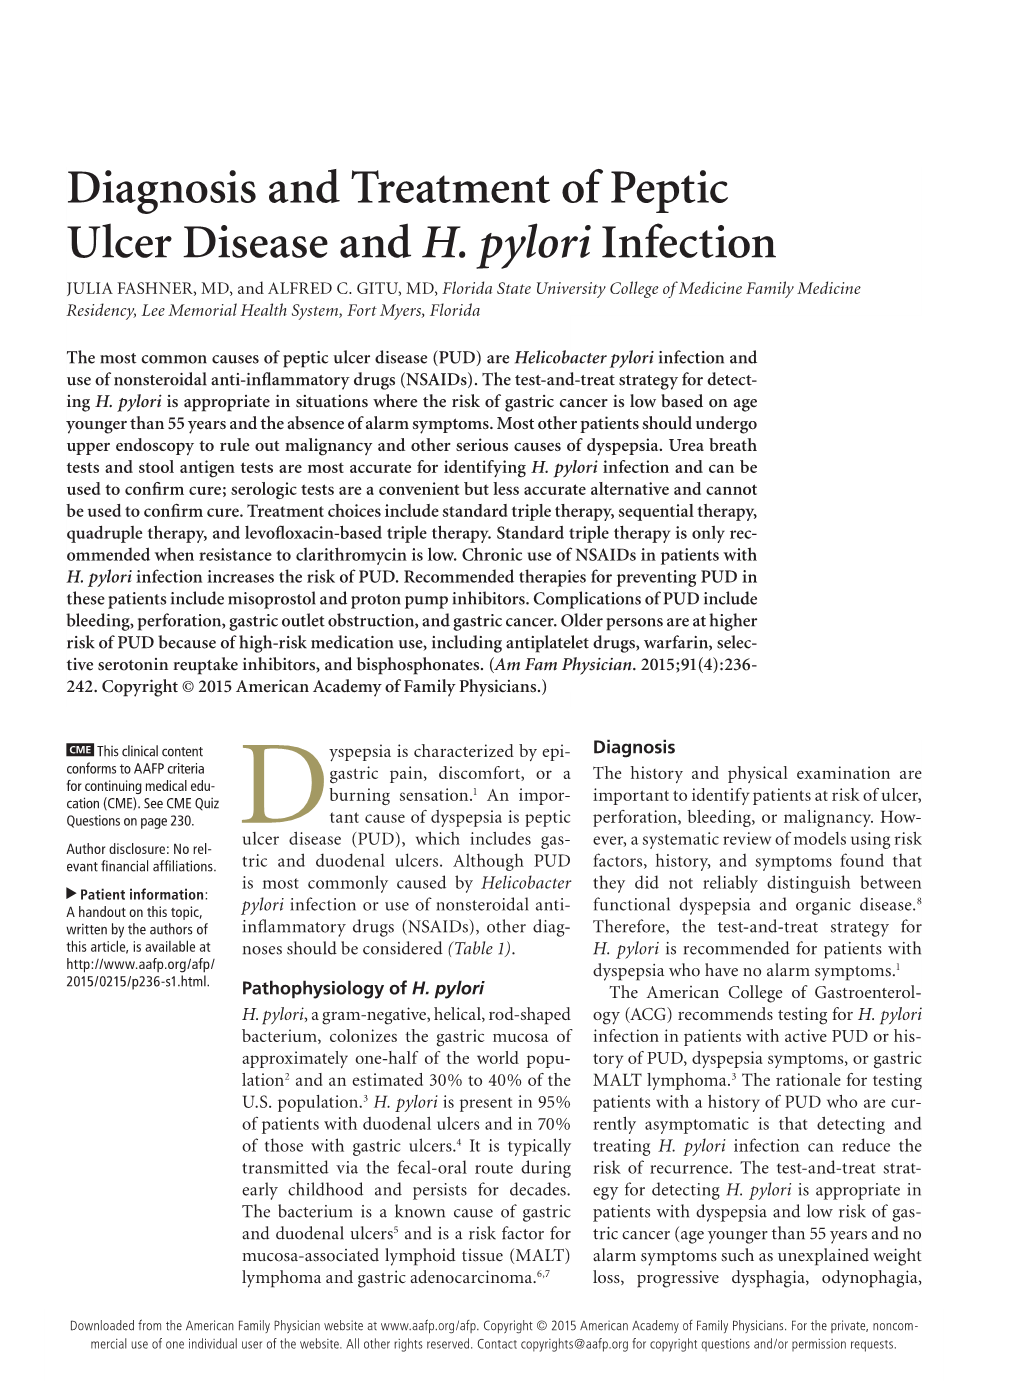 Diagnosis and Treatment of Peptic Ulcer Disease and H. Pylori Infection JULIA FASHNER, MD, and ALFRED C